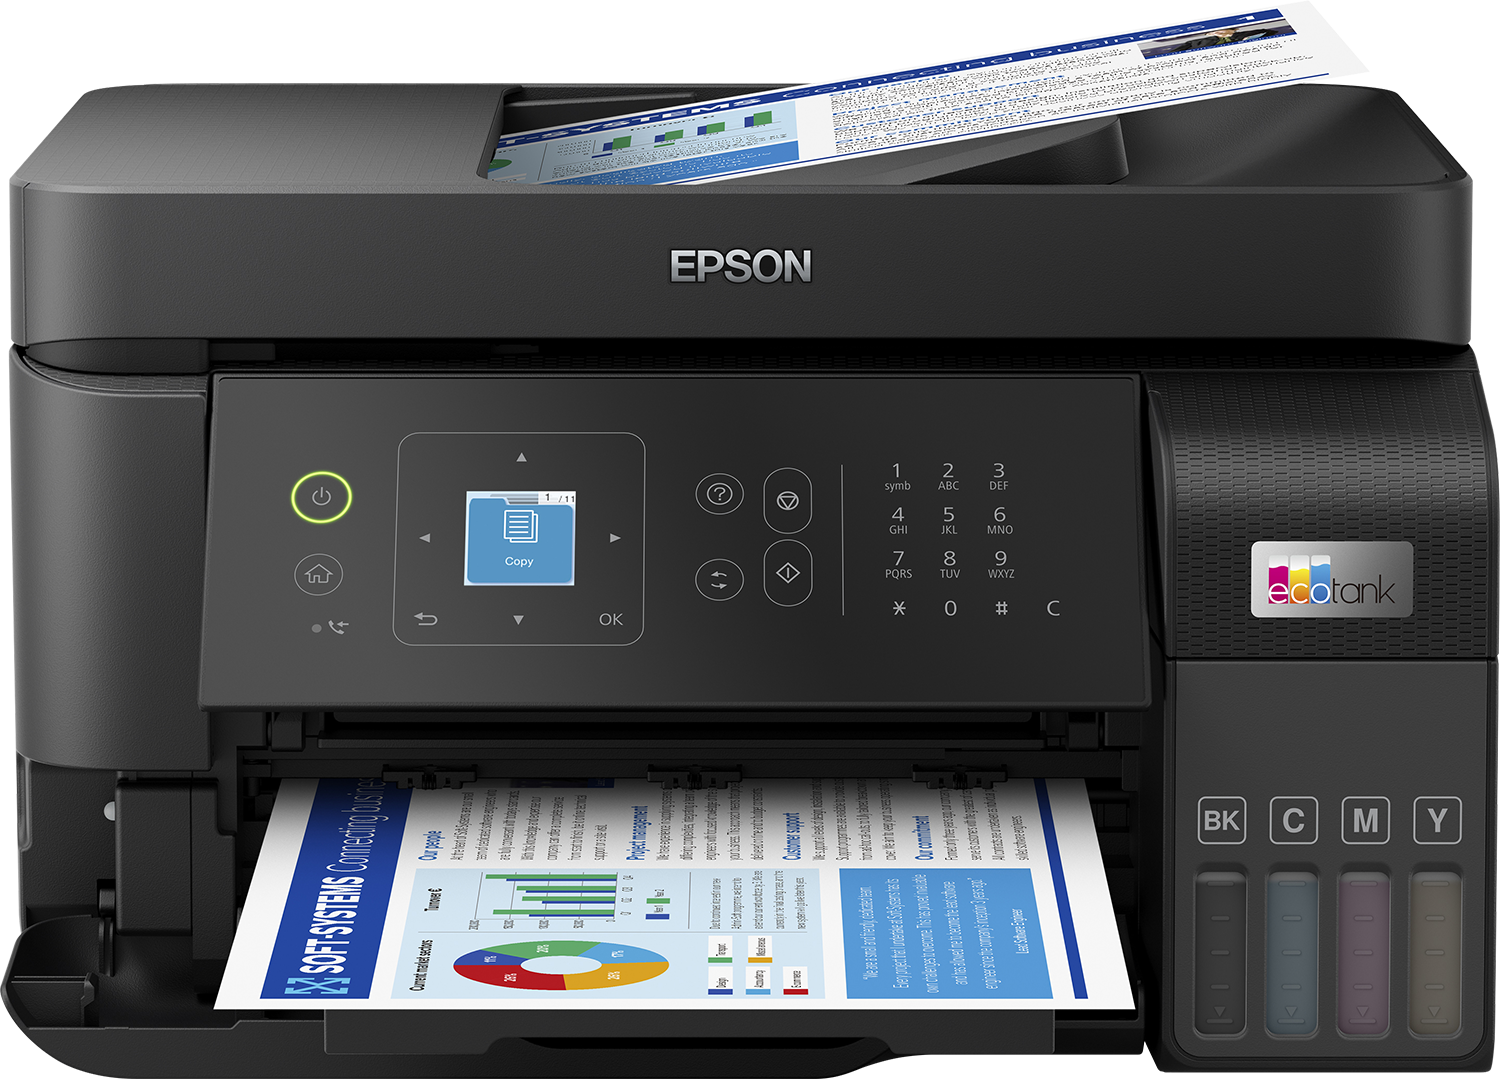 Tips for Printing Transparencies with Epson Inkjet Printers